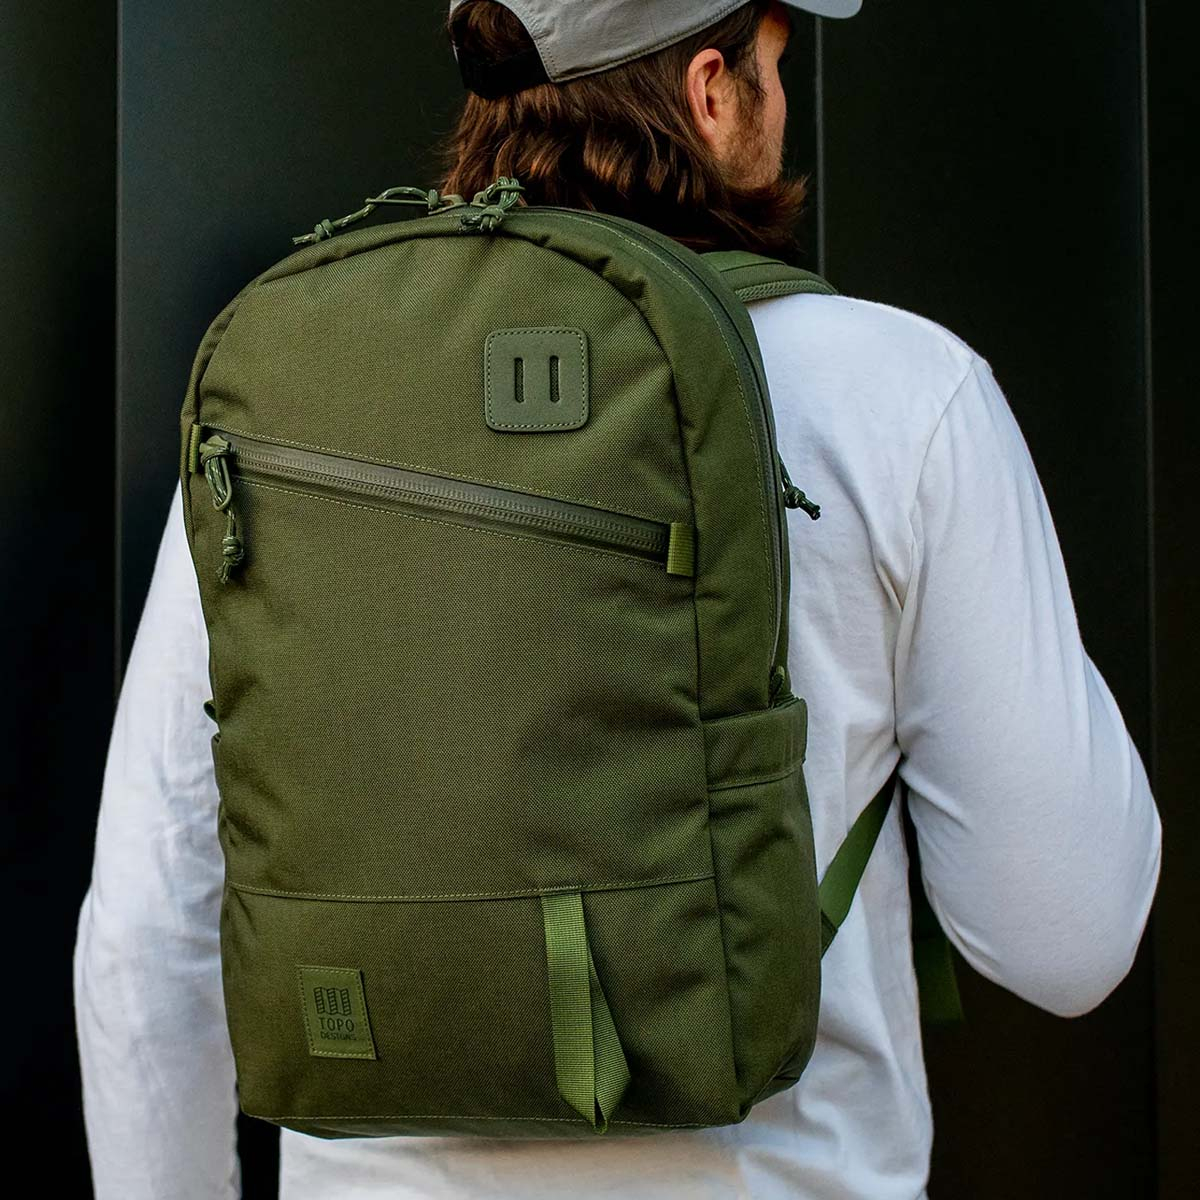 Topo Designs Daypack Tech Olive, it’s great as an everyday work bag, yet it has enough room for extra layers on the trail